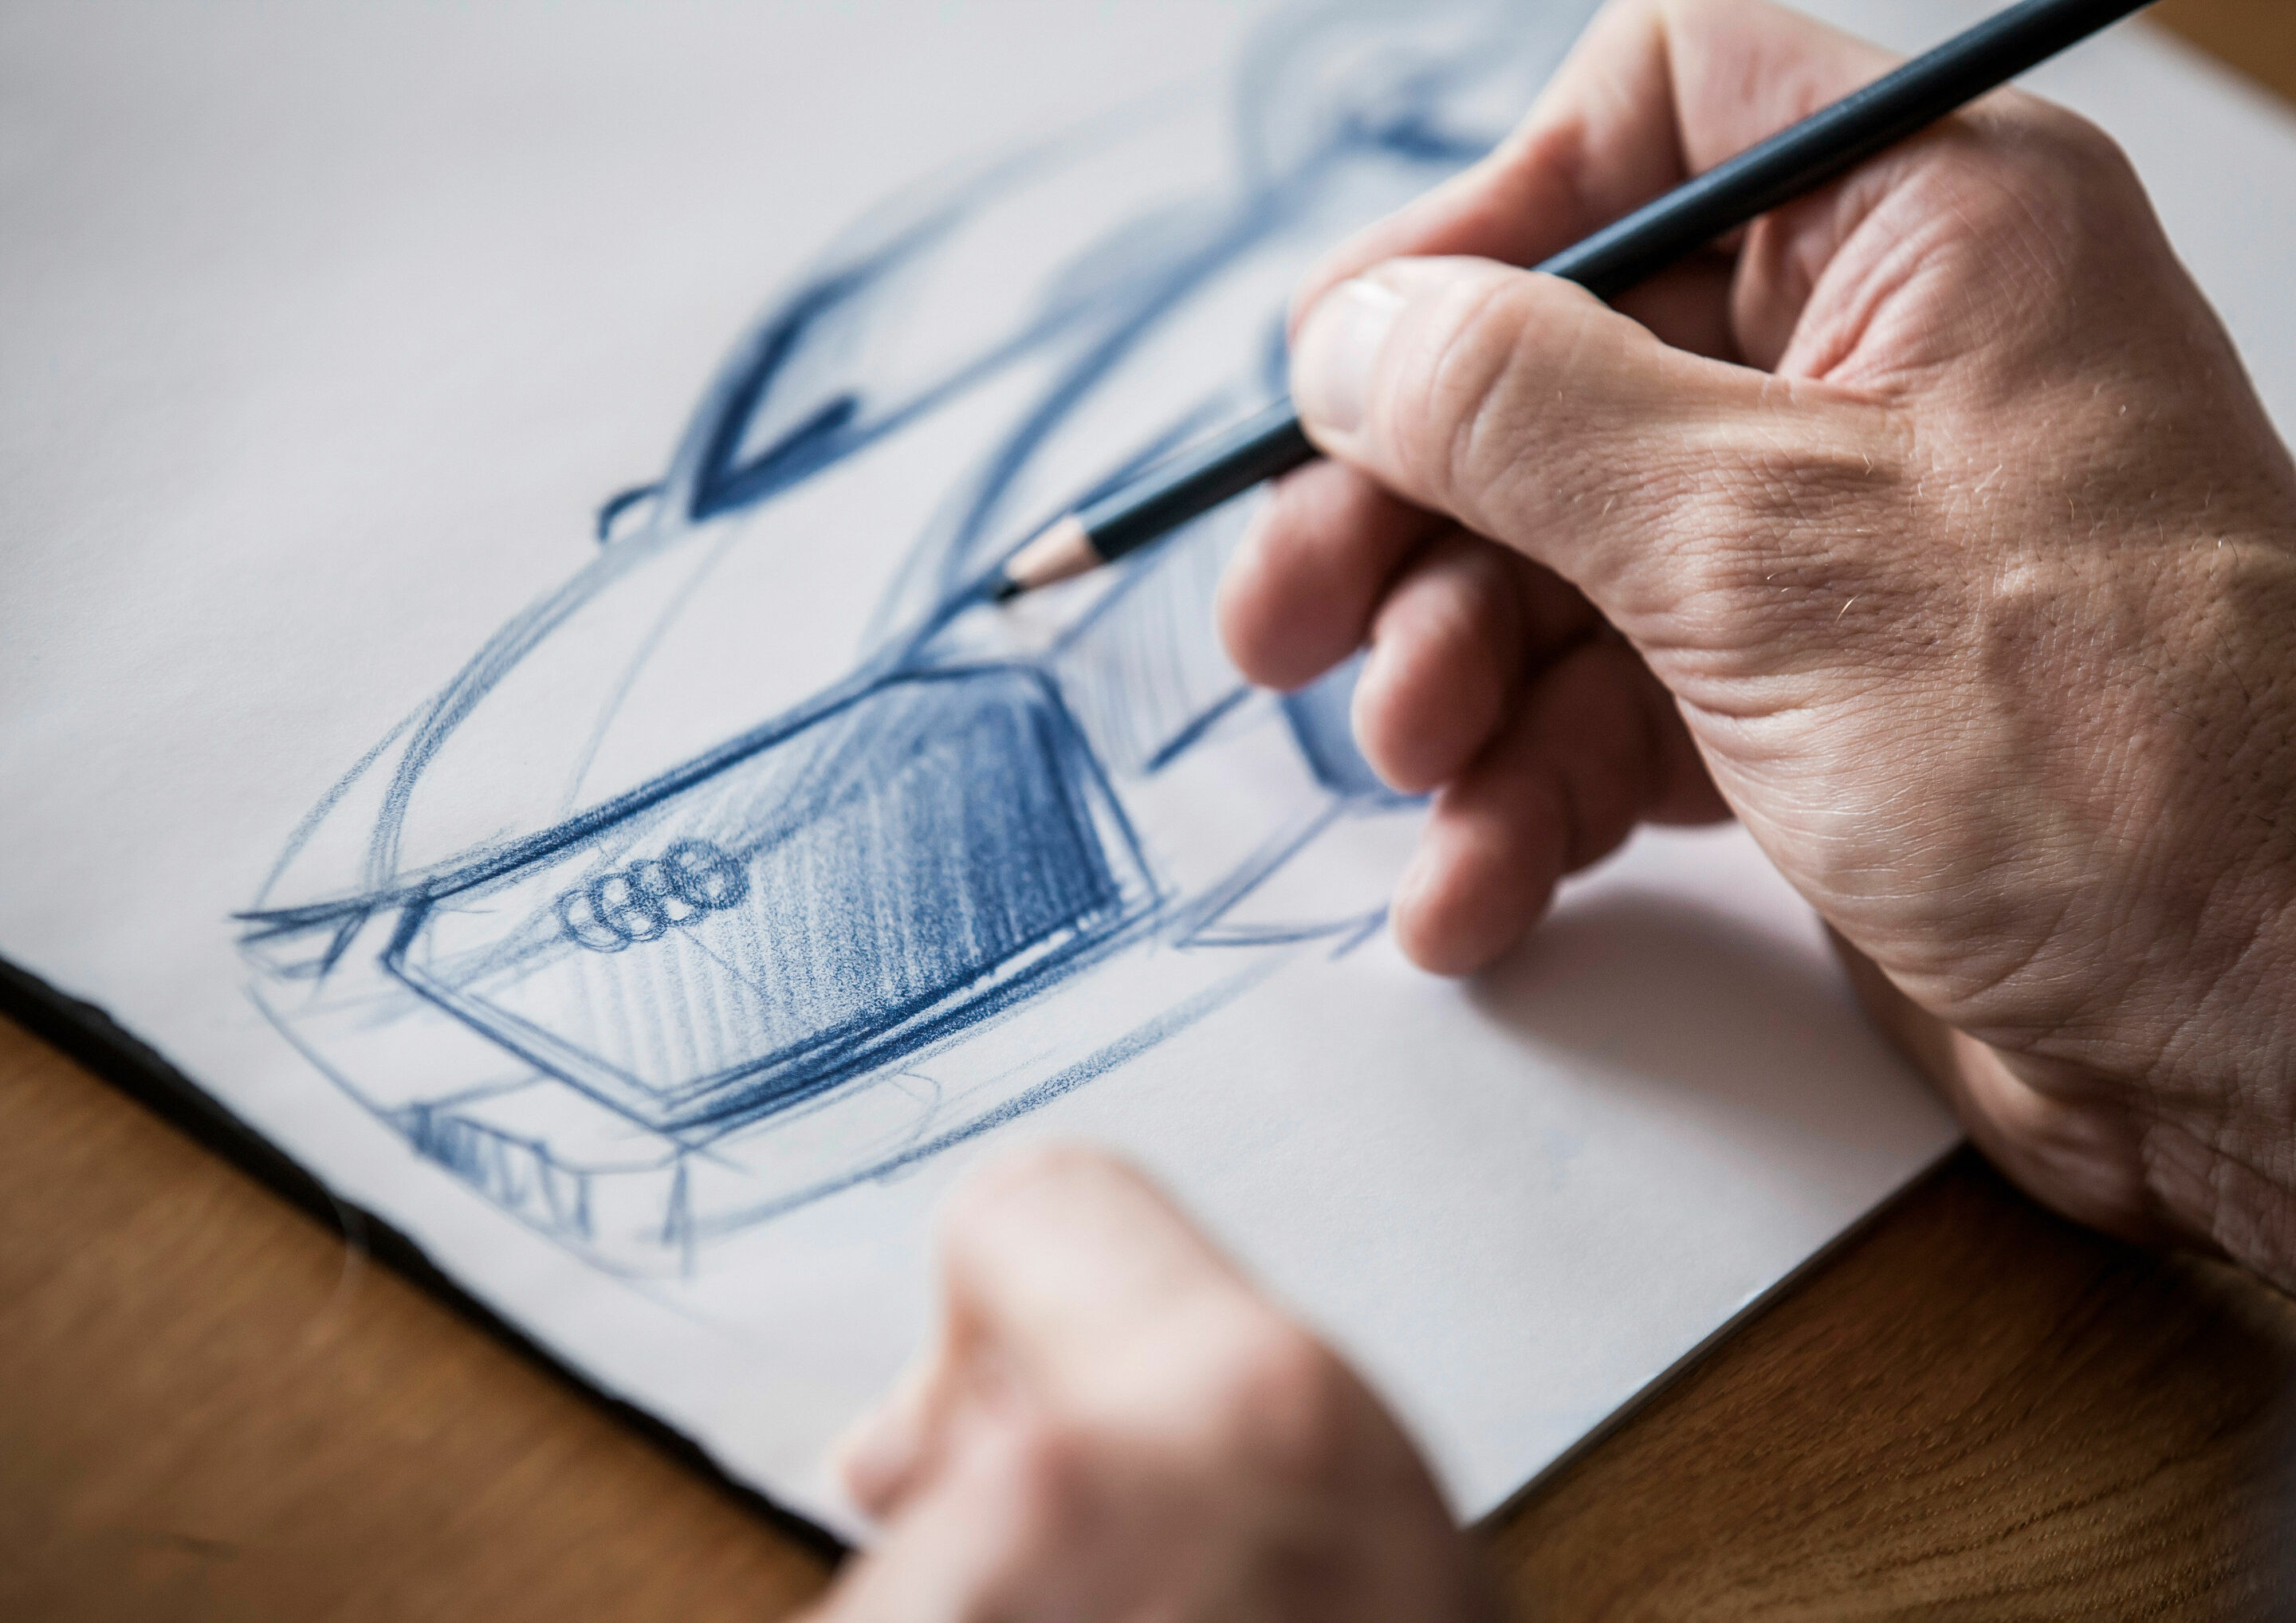 Tour the design laboratory of Audi online with  “Insight Audi Design”